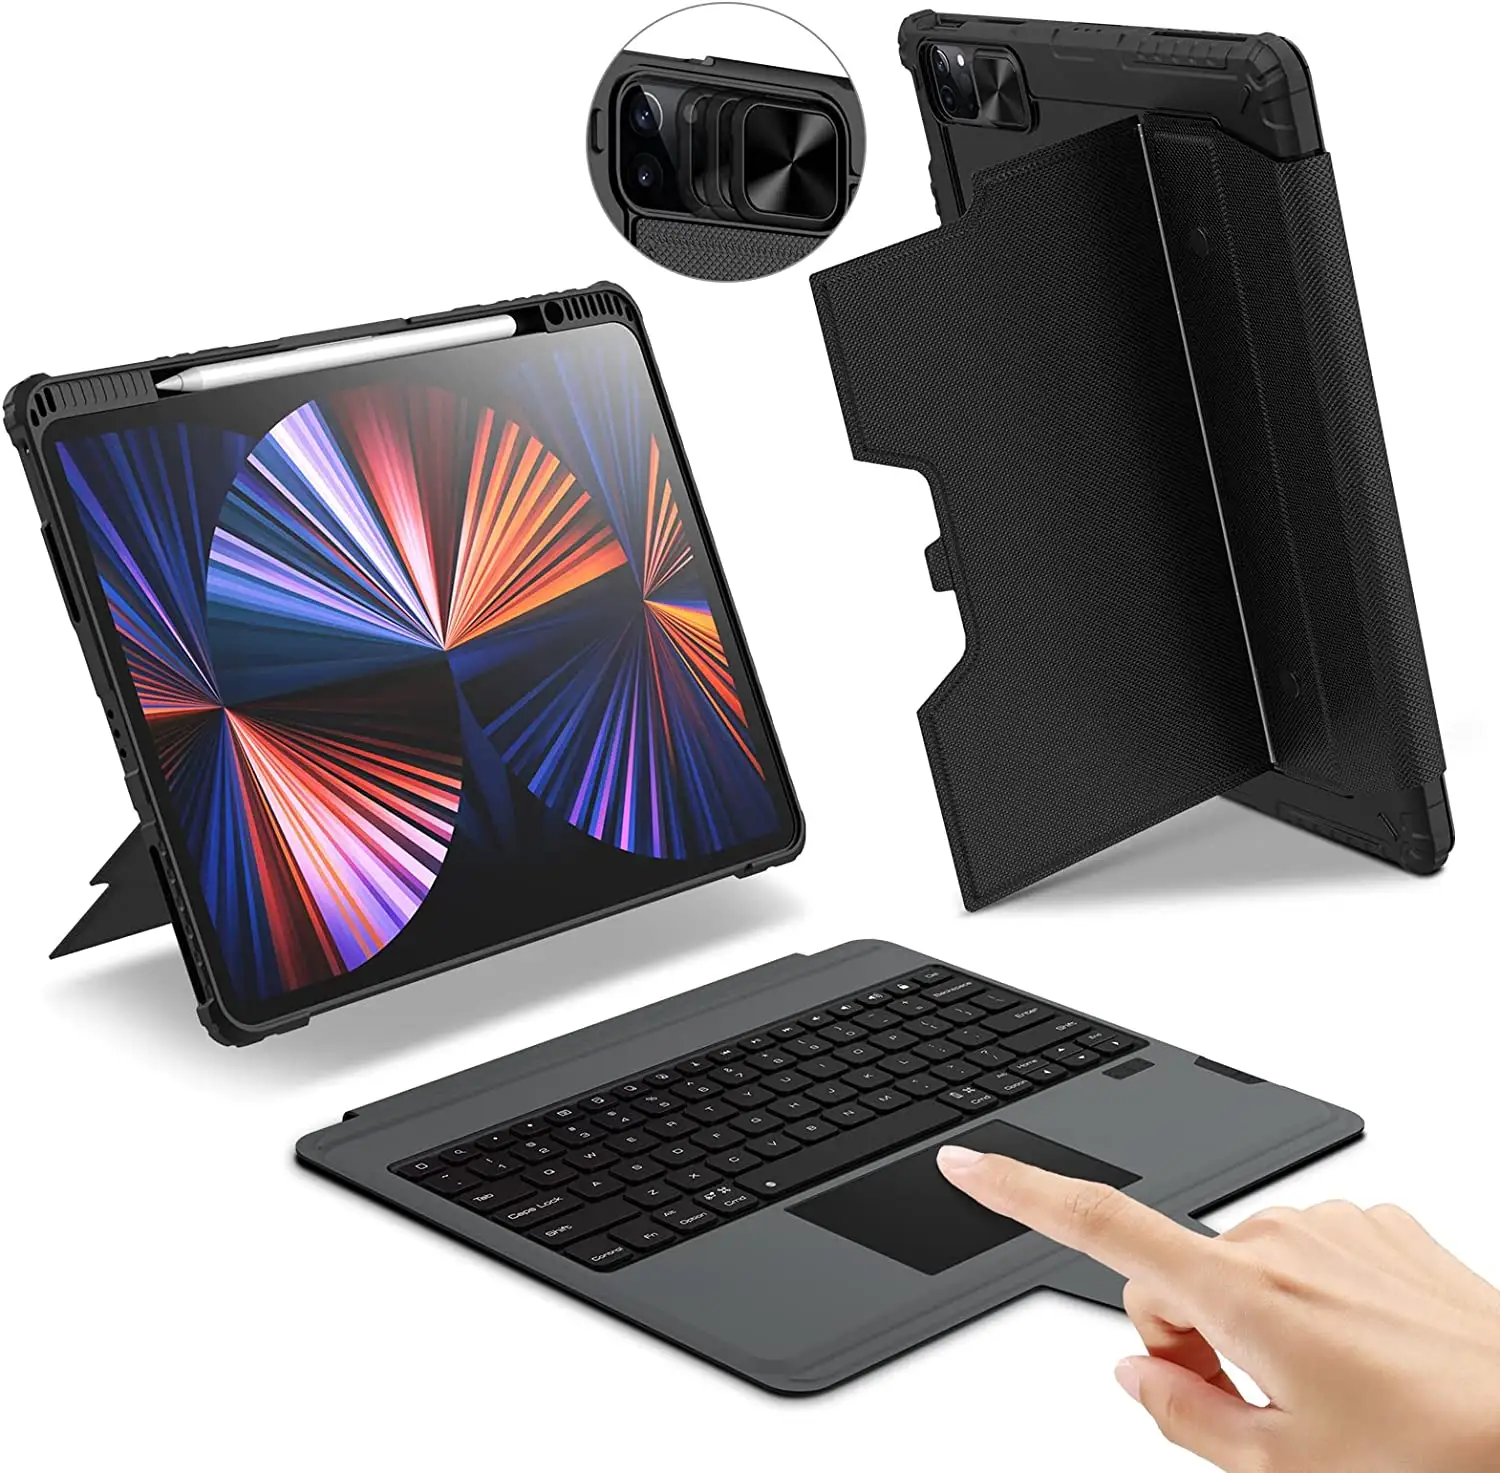 Nillkin Keyboard Case for iPad 10th Generation 2022 New 10.9 inch with Pencil Holder Tablet Cover for iPad 2022 Keyboard Case